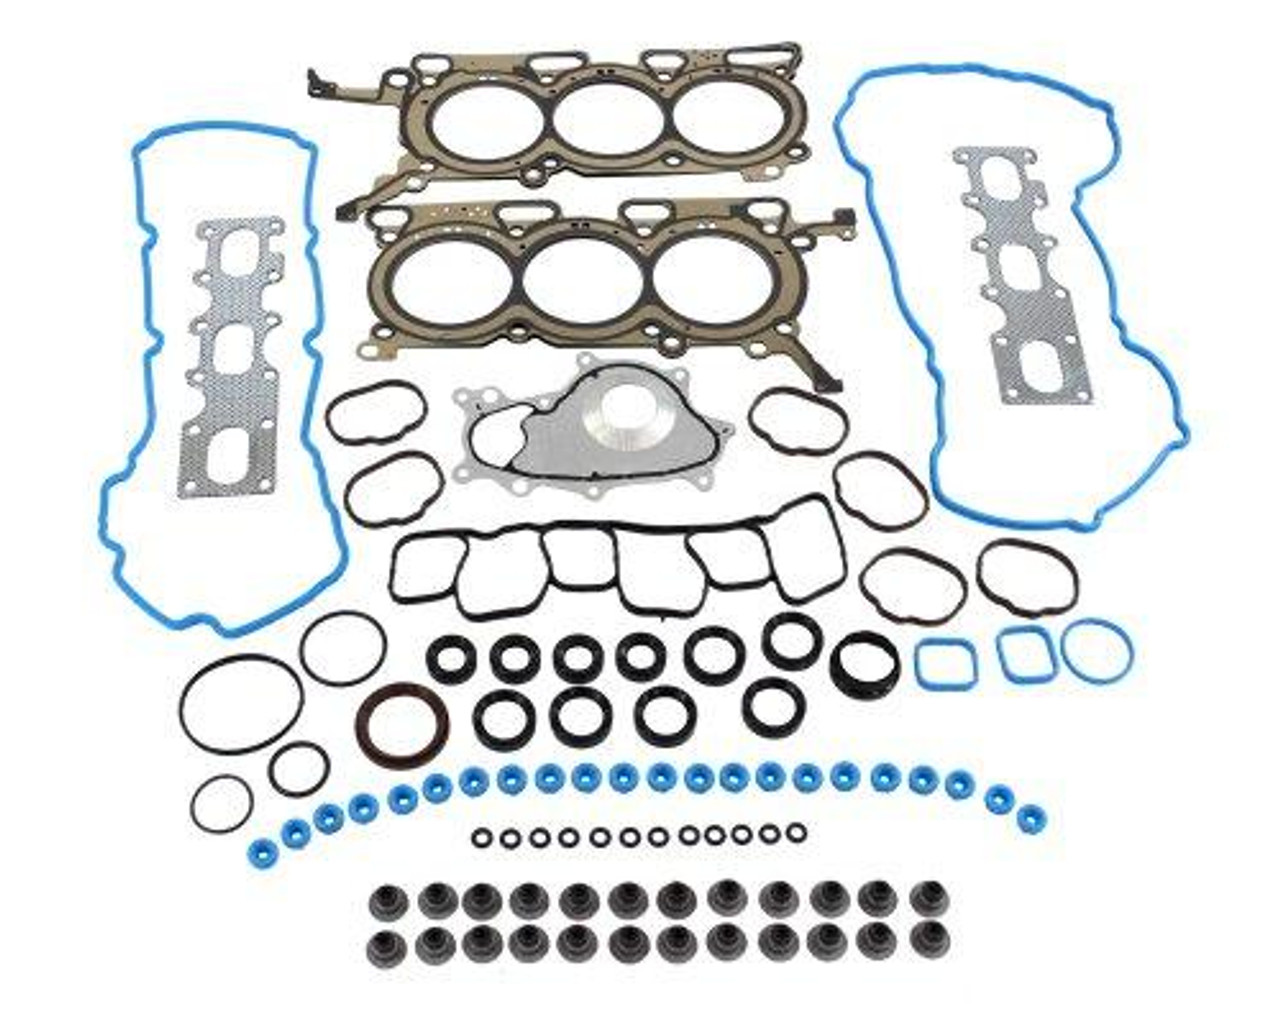 Head Gasket Set - 2015 Ford Mustang 3.7L Engine Parts # HGS4298ZE9